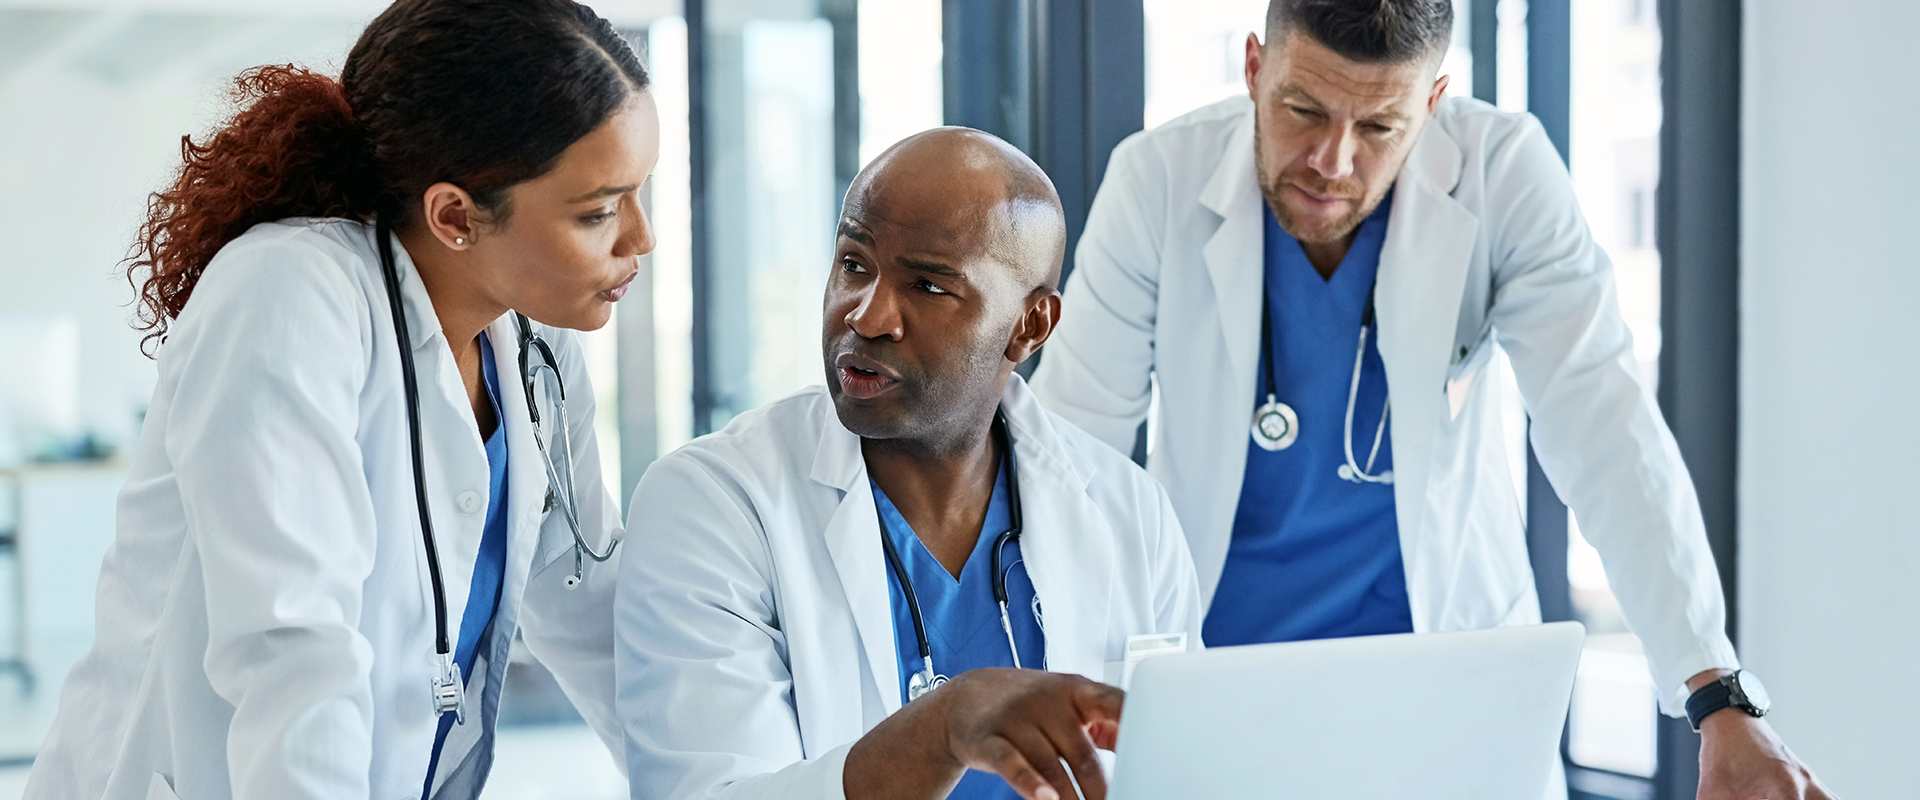 5 Ways Healthcare Providers Can Improve Patient Care